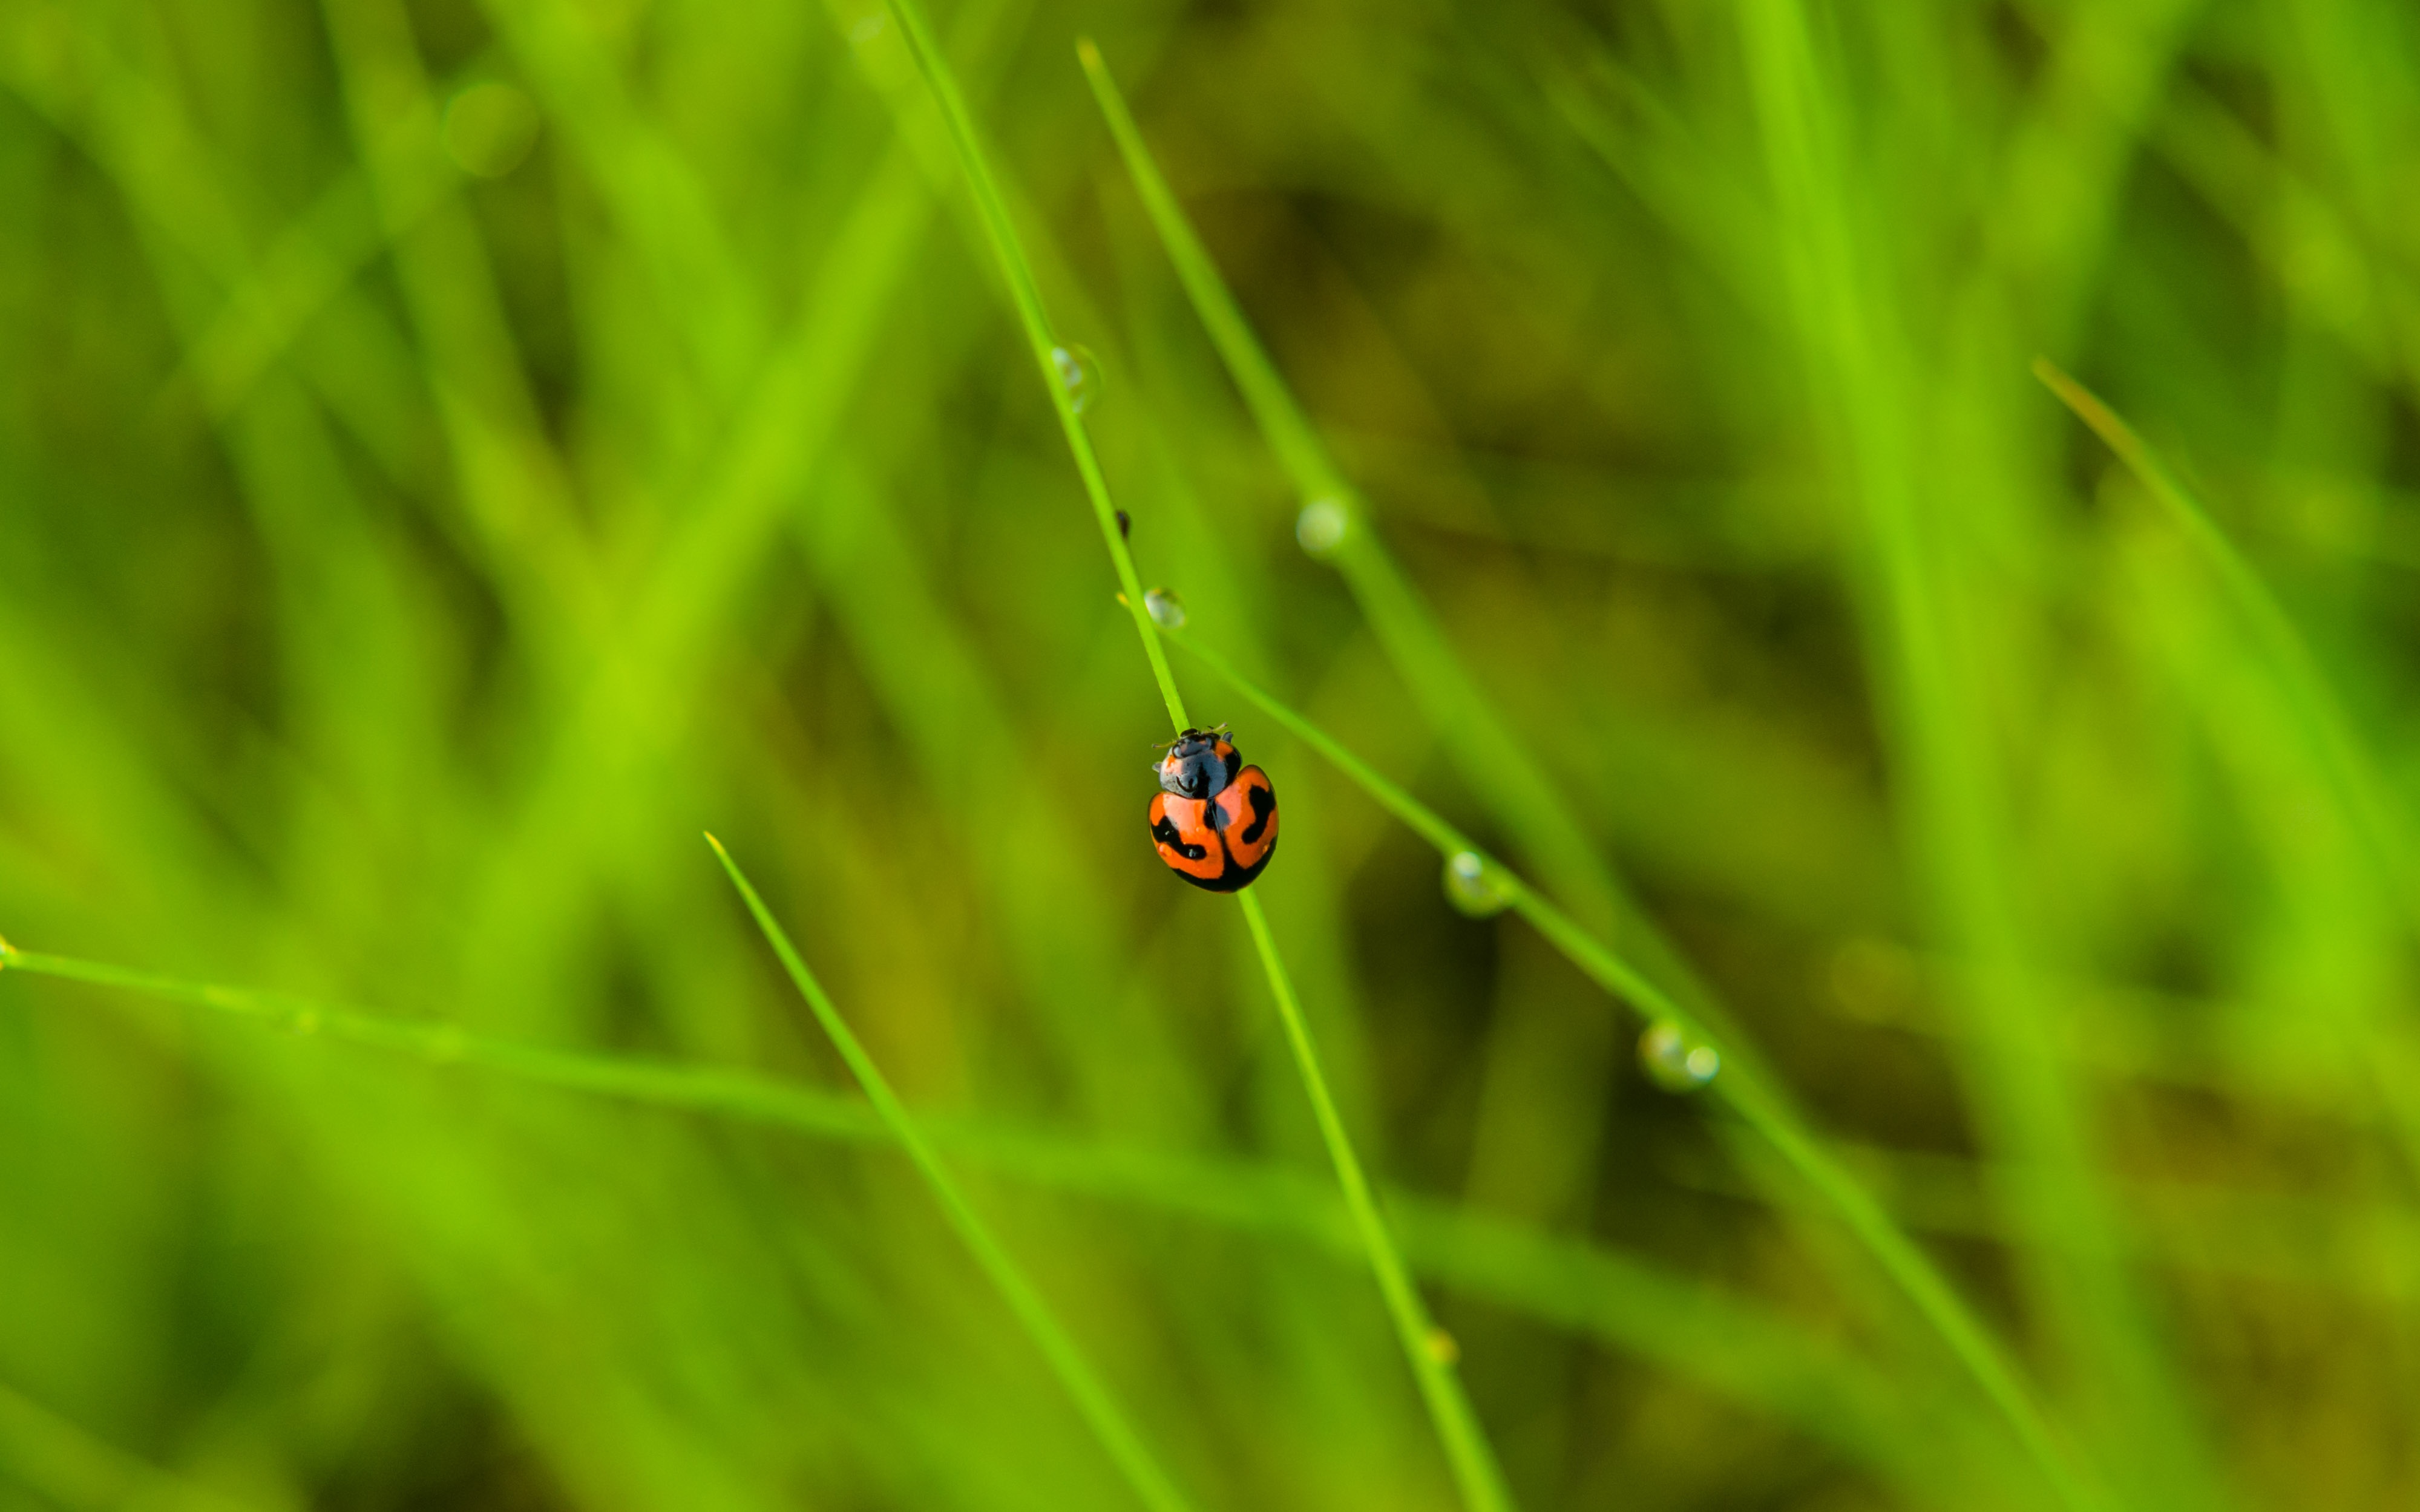 117811 Screensavers and Wallpapers Insect for phone. Download grass, macro, insect, ladybug, ladybird, dew pictures for free